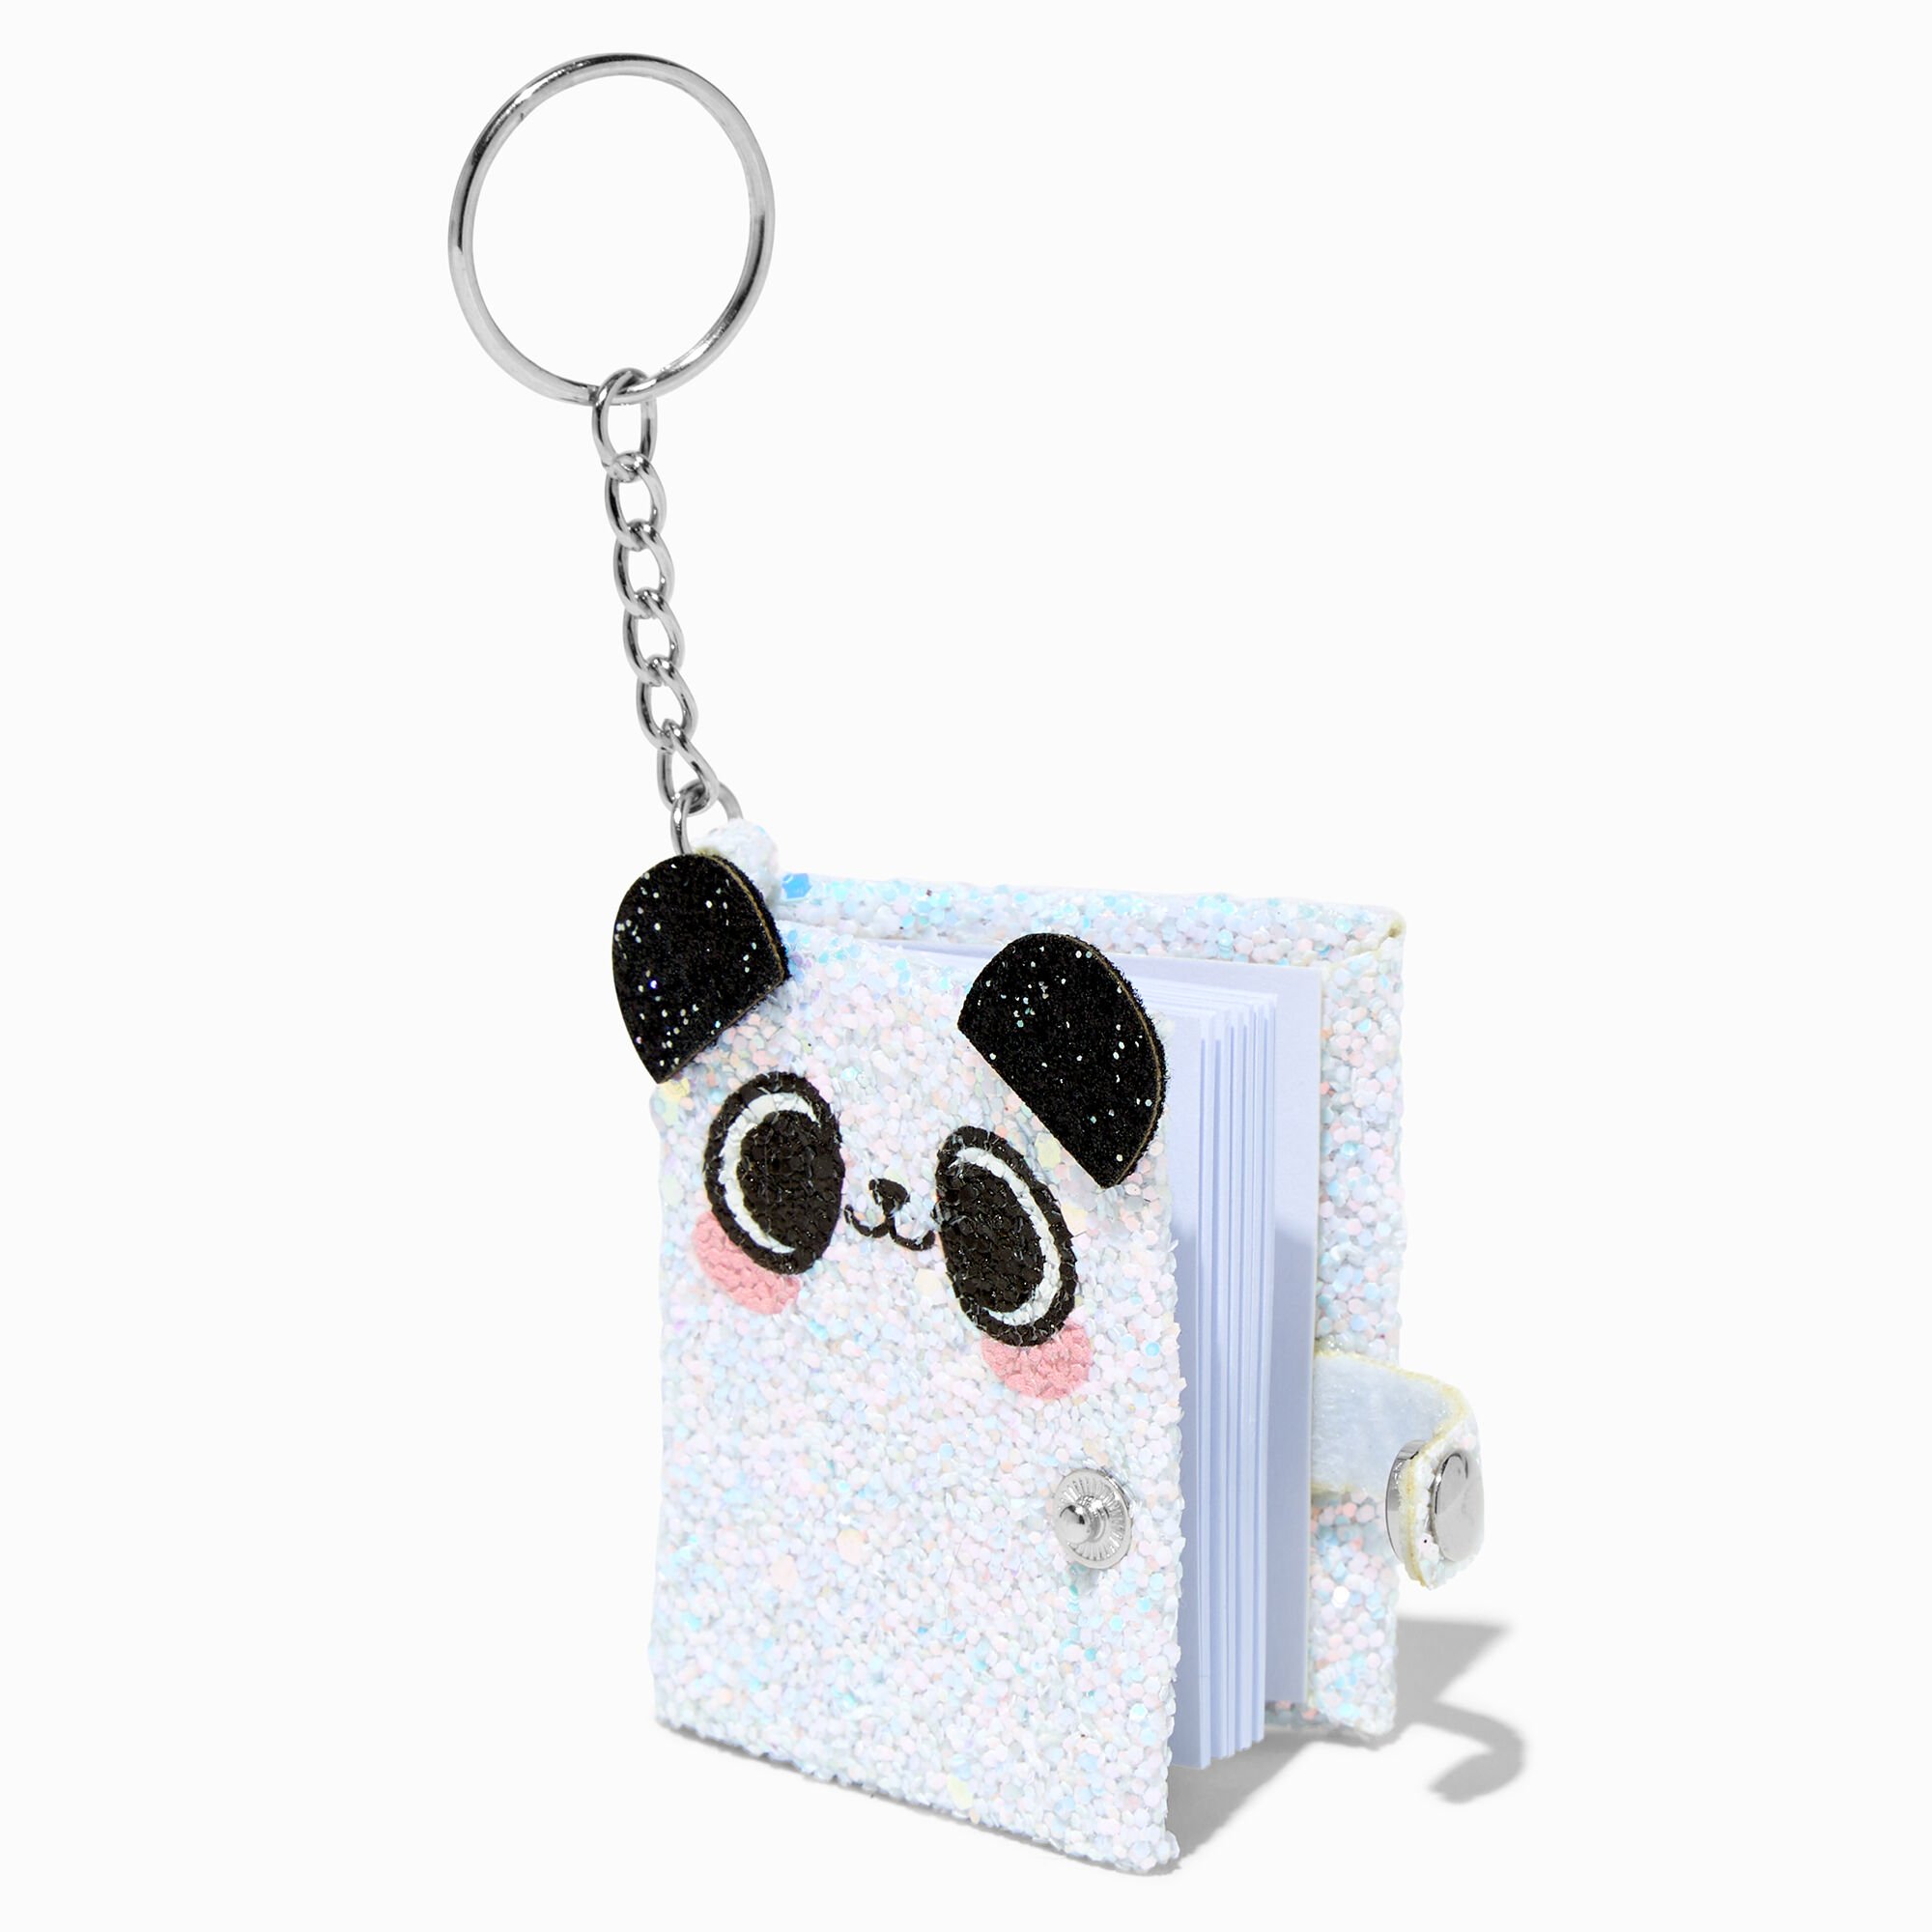 View Claires Glitter Panda Mini Diary Keyring information